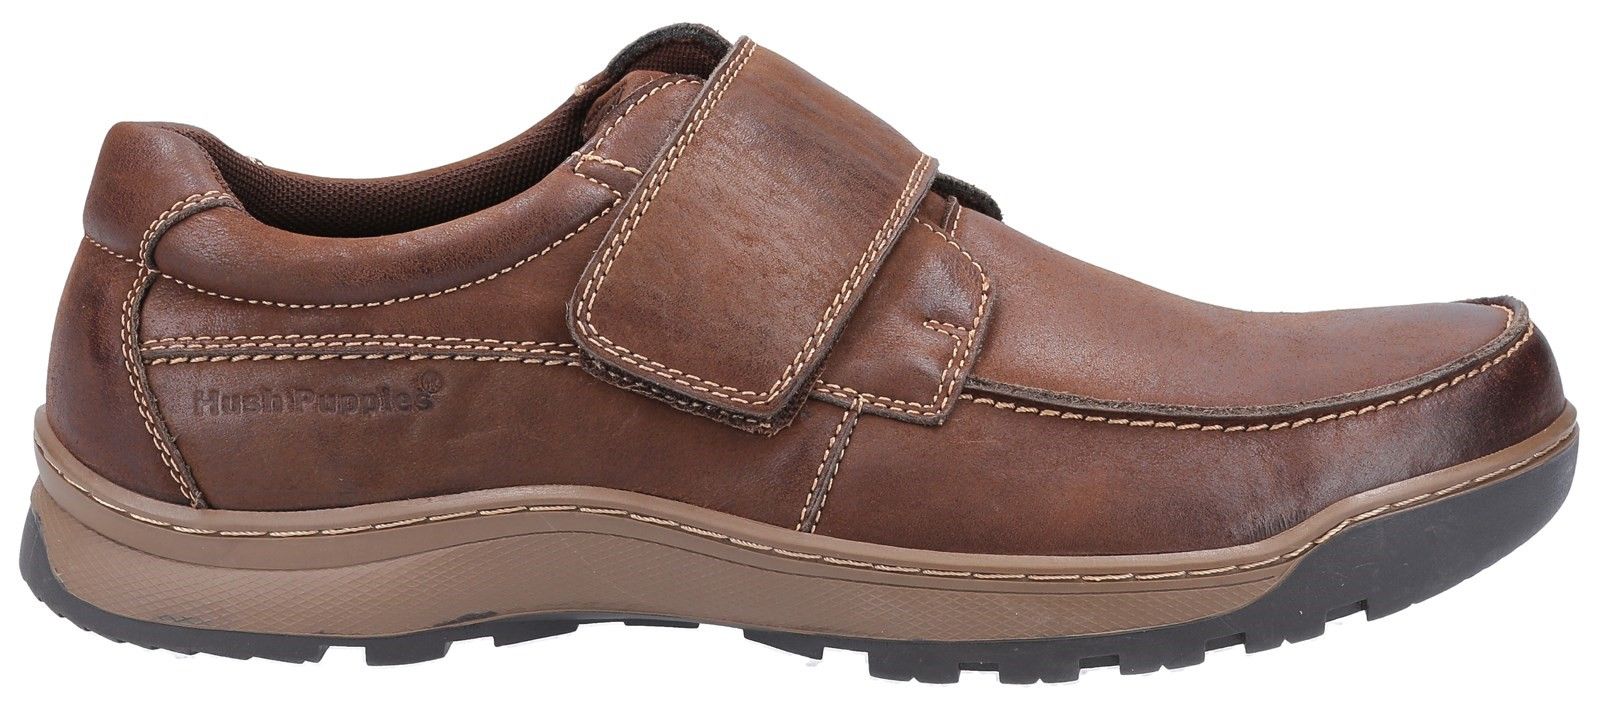 Men's classic touch fastening shoe Casper; perfect for relaxed day-to-day styling with comfortable leather uppers, padded collar, memory footbed and flexible sole for all day comfort.Leather upper. 
Easy velcro fastening. 
Padded collar for added comfort. 
Breathable textile lining. 
Memory foam comfort insole.